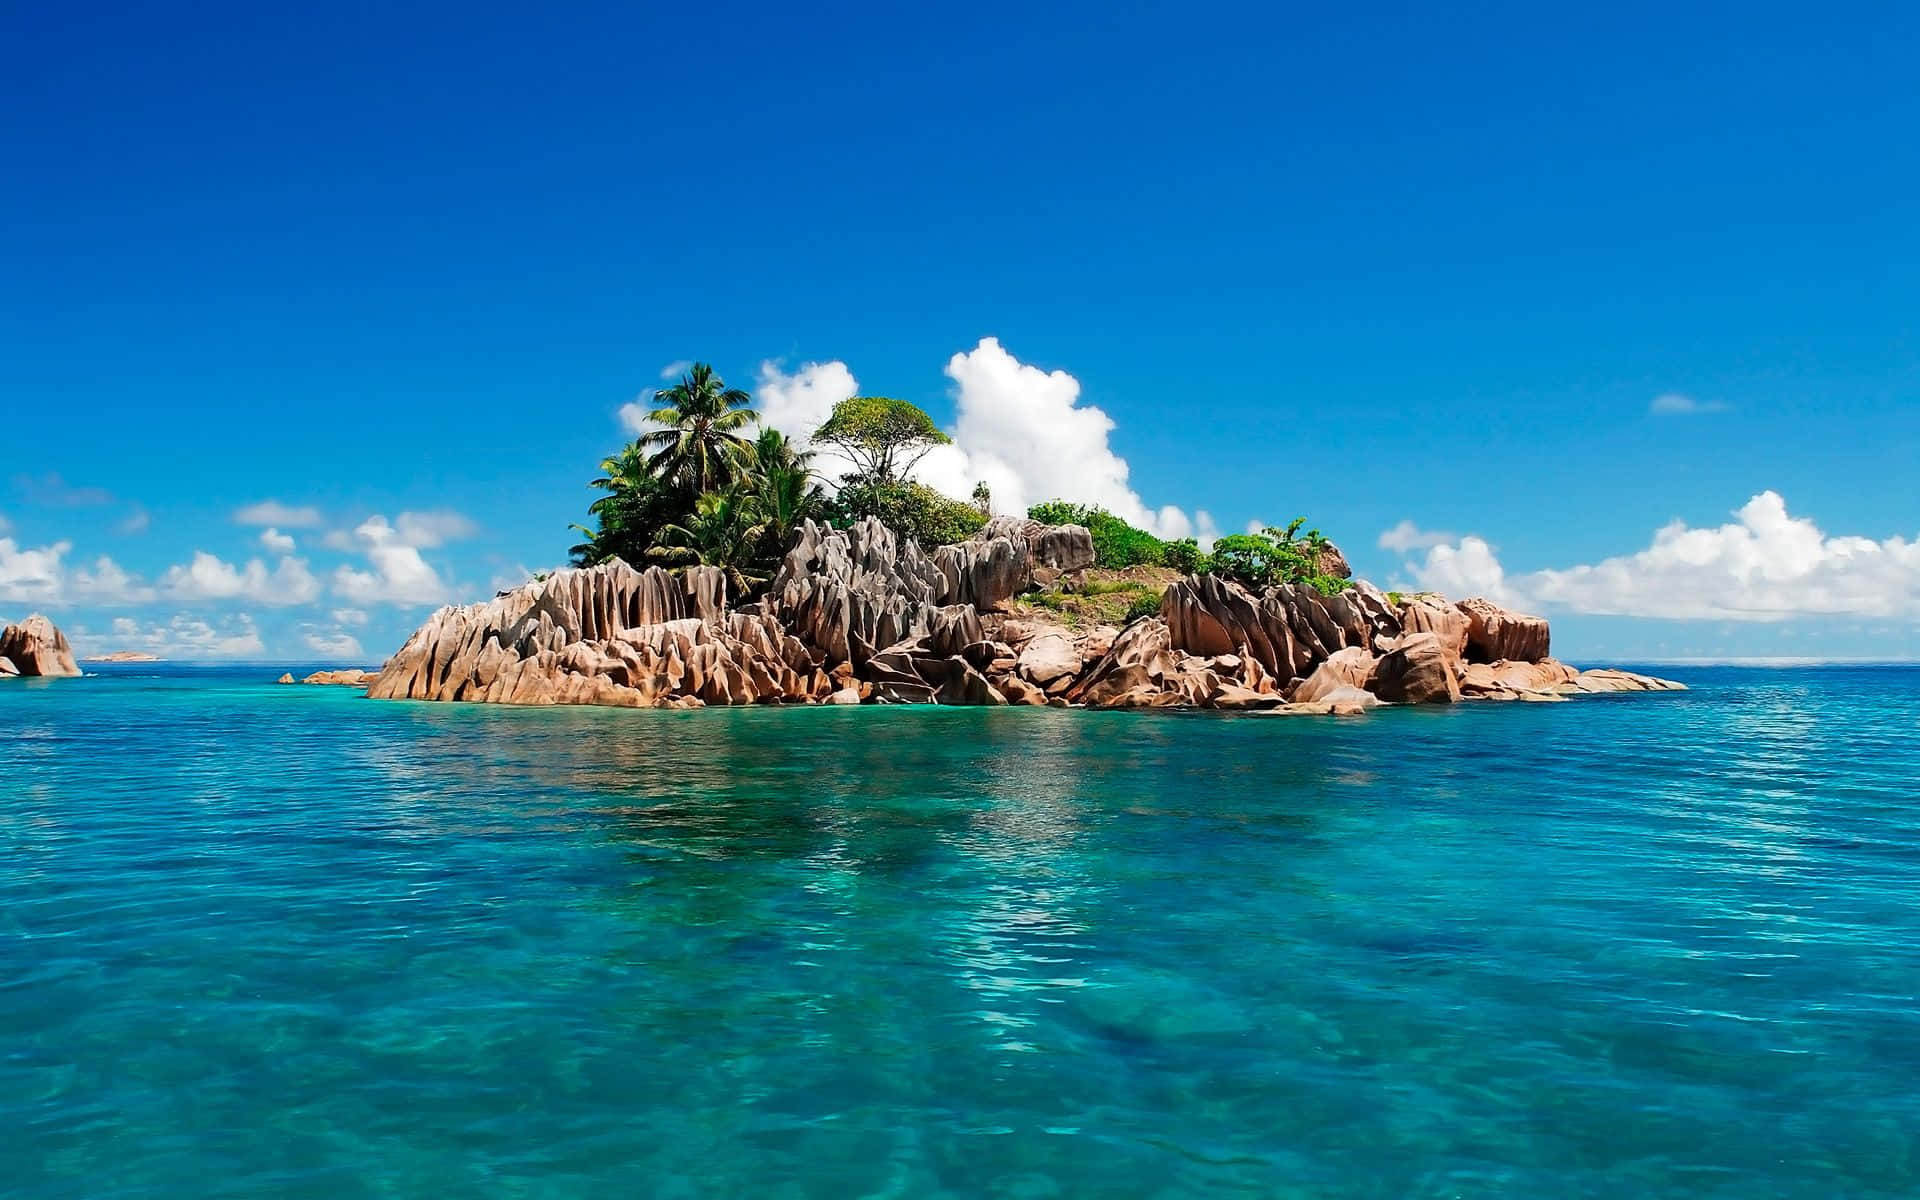 Take A Relaxing Vacation On This Beautiful Island